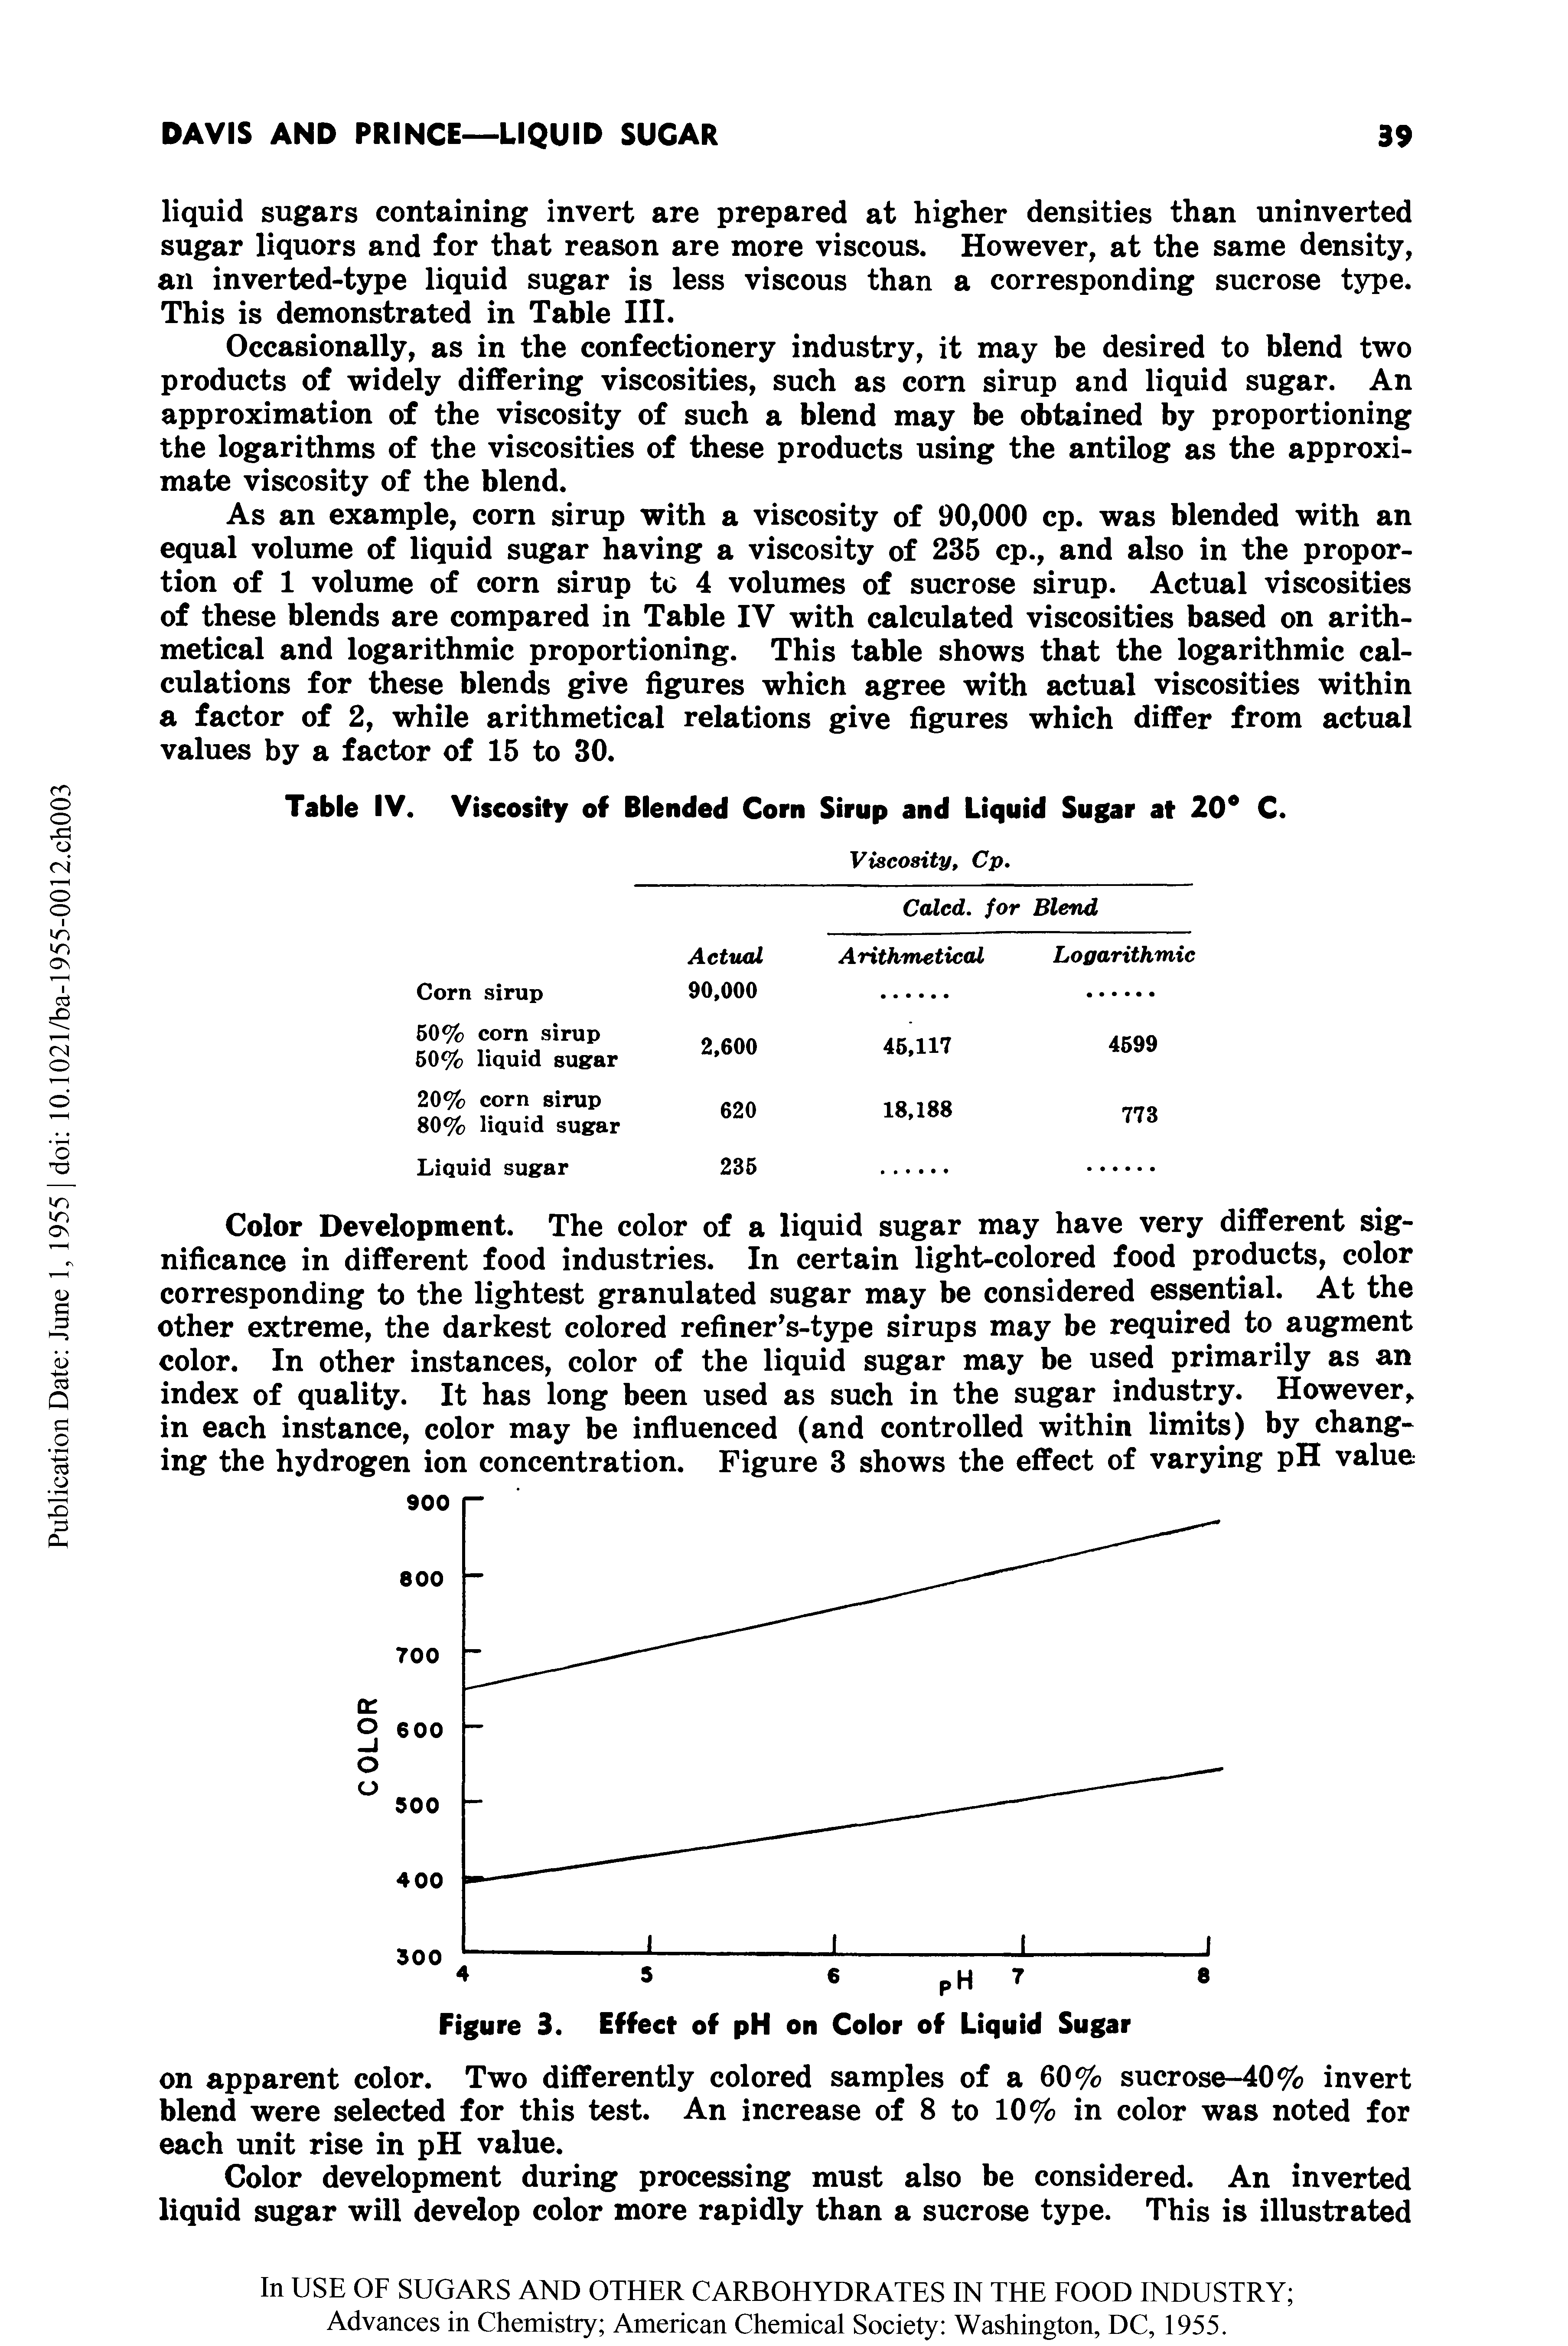 Table IV. Viscosity of Blended Corn Sirup and Liquid Sugar at 20° C.